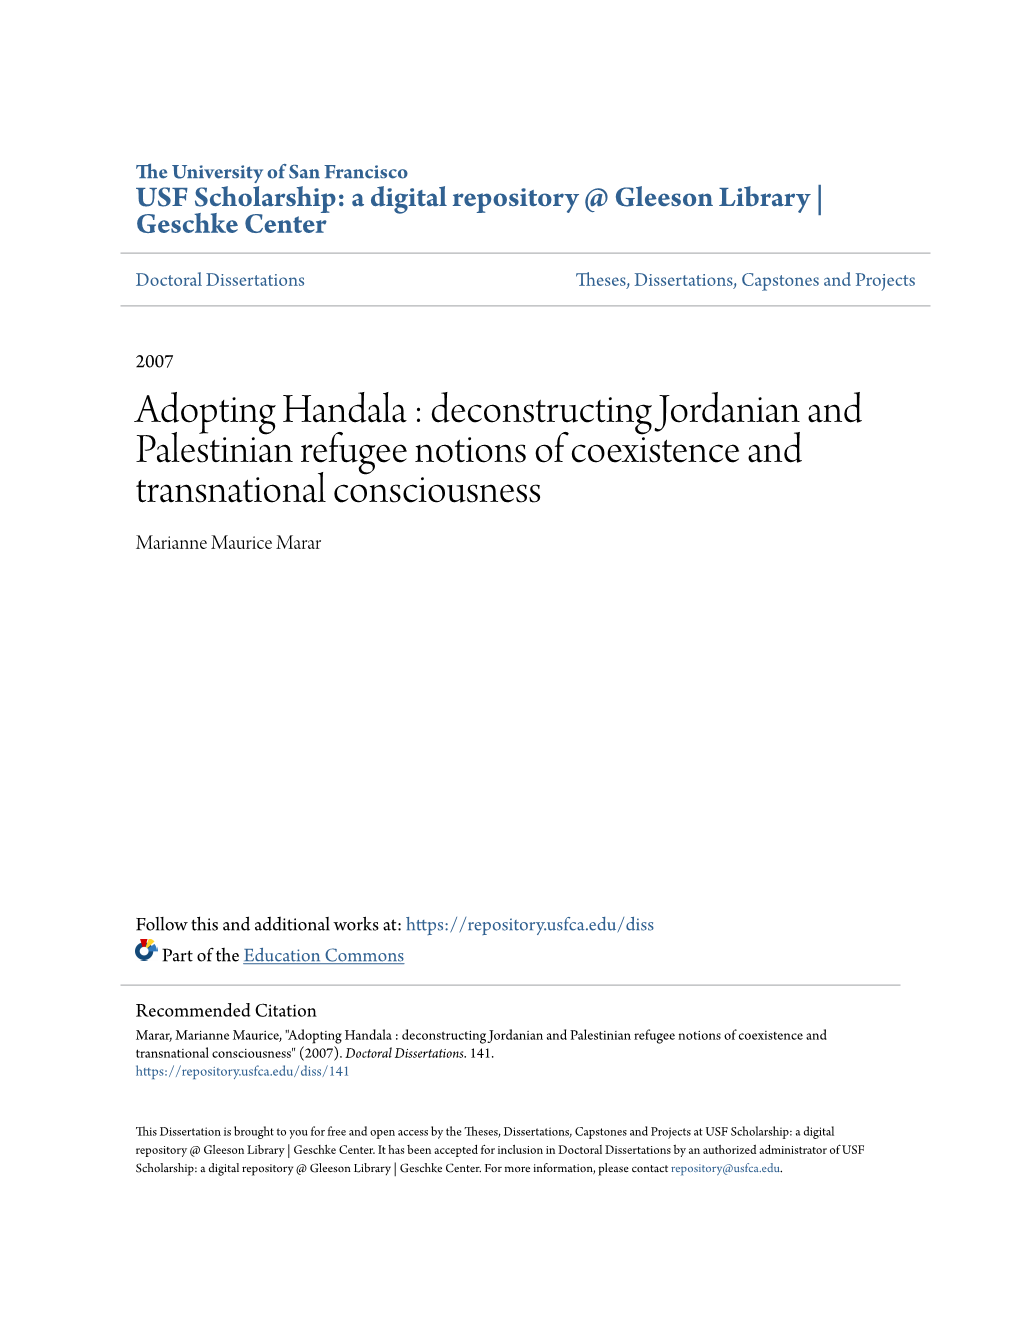 Adopting Handala : Deconstructing Jordanian and Palestinian Refugee Notions of Coexistence and Transnational Consciousness Marianne Maurice Marar